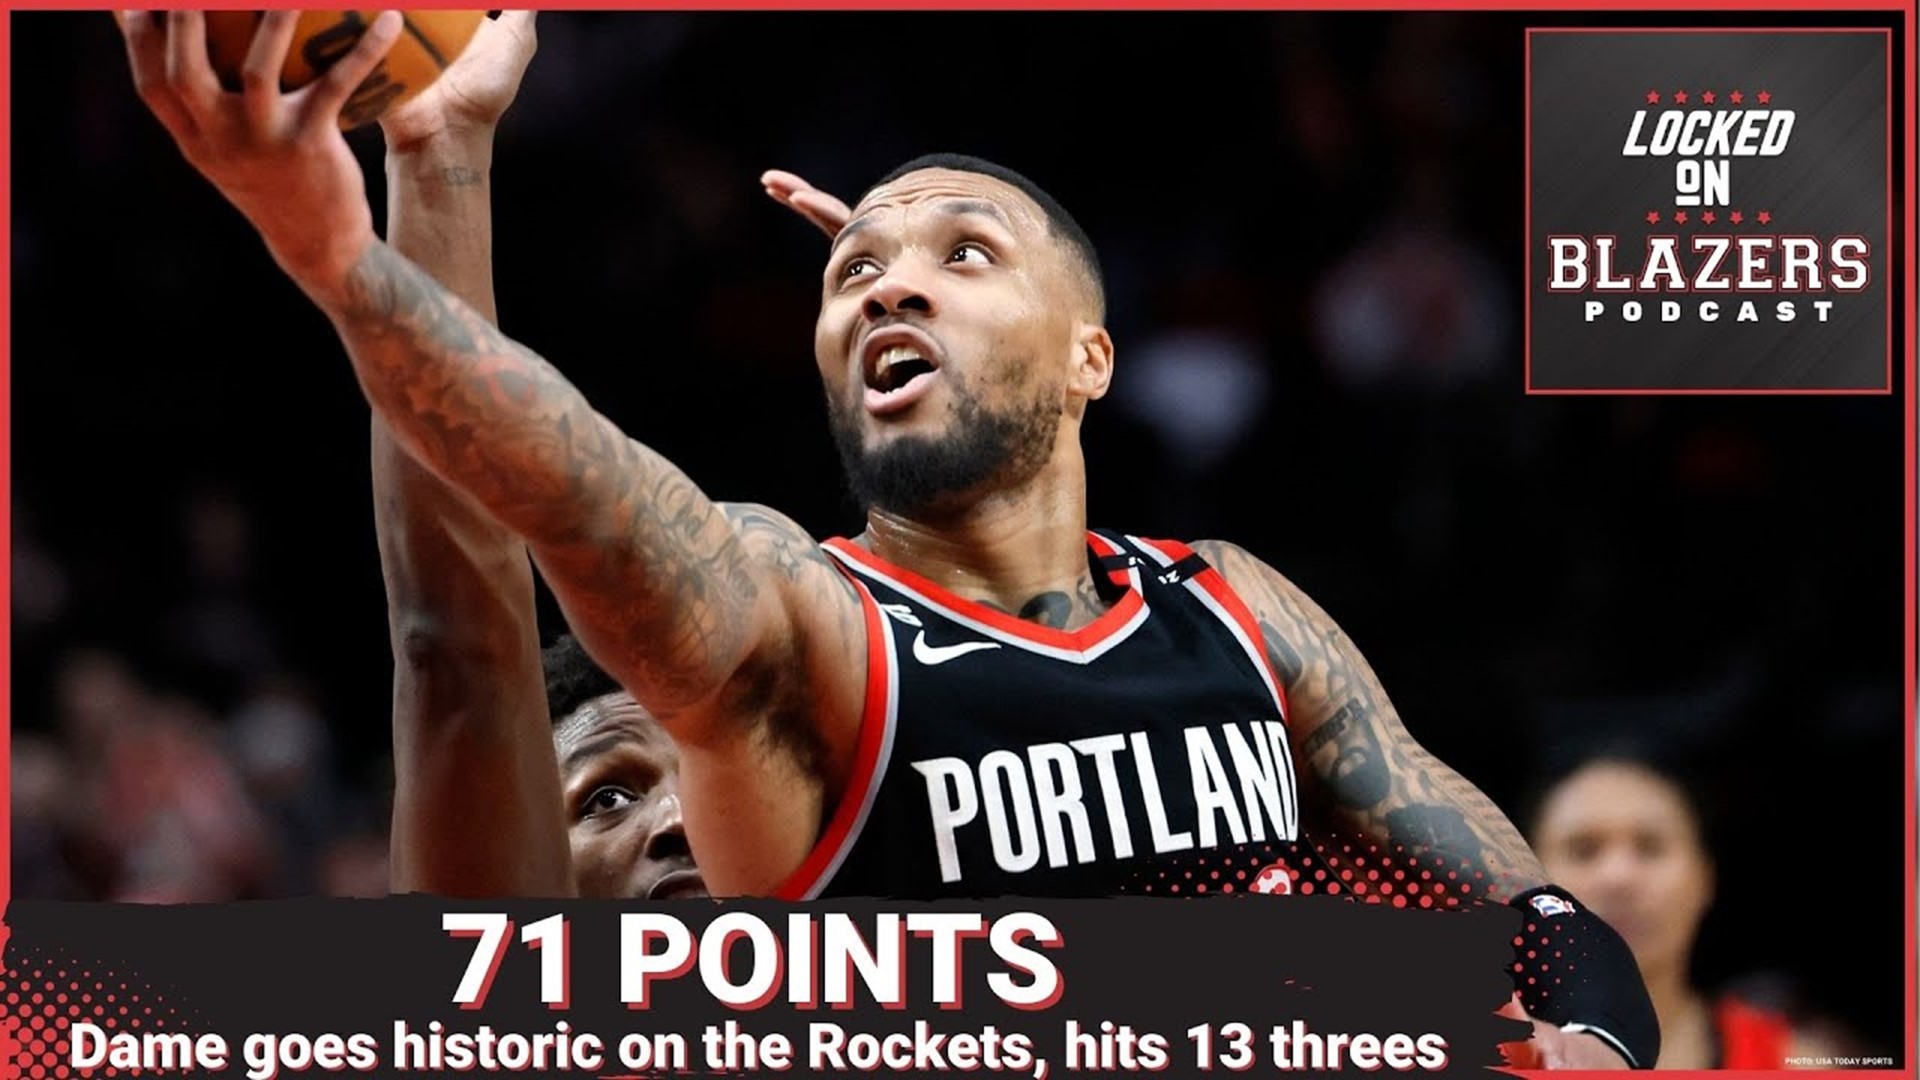 However good you think Damian Lillard is, he's better. He set a franchise record with 71 points and 13 3-pointers in a 131-114 win over the Houston Rockets.